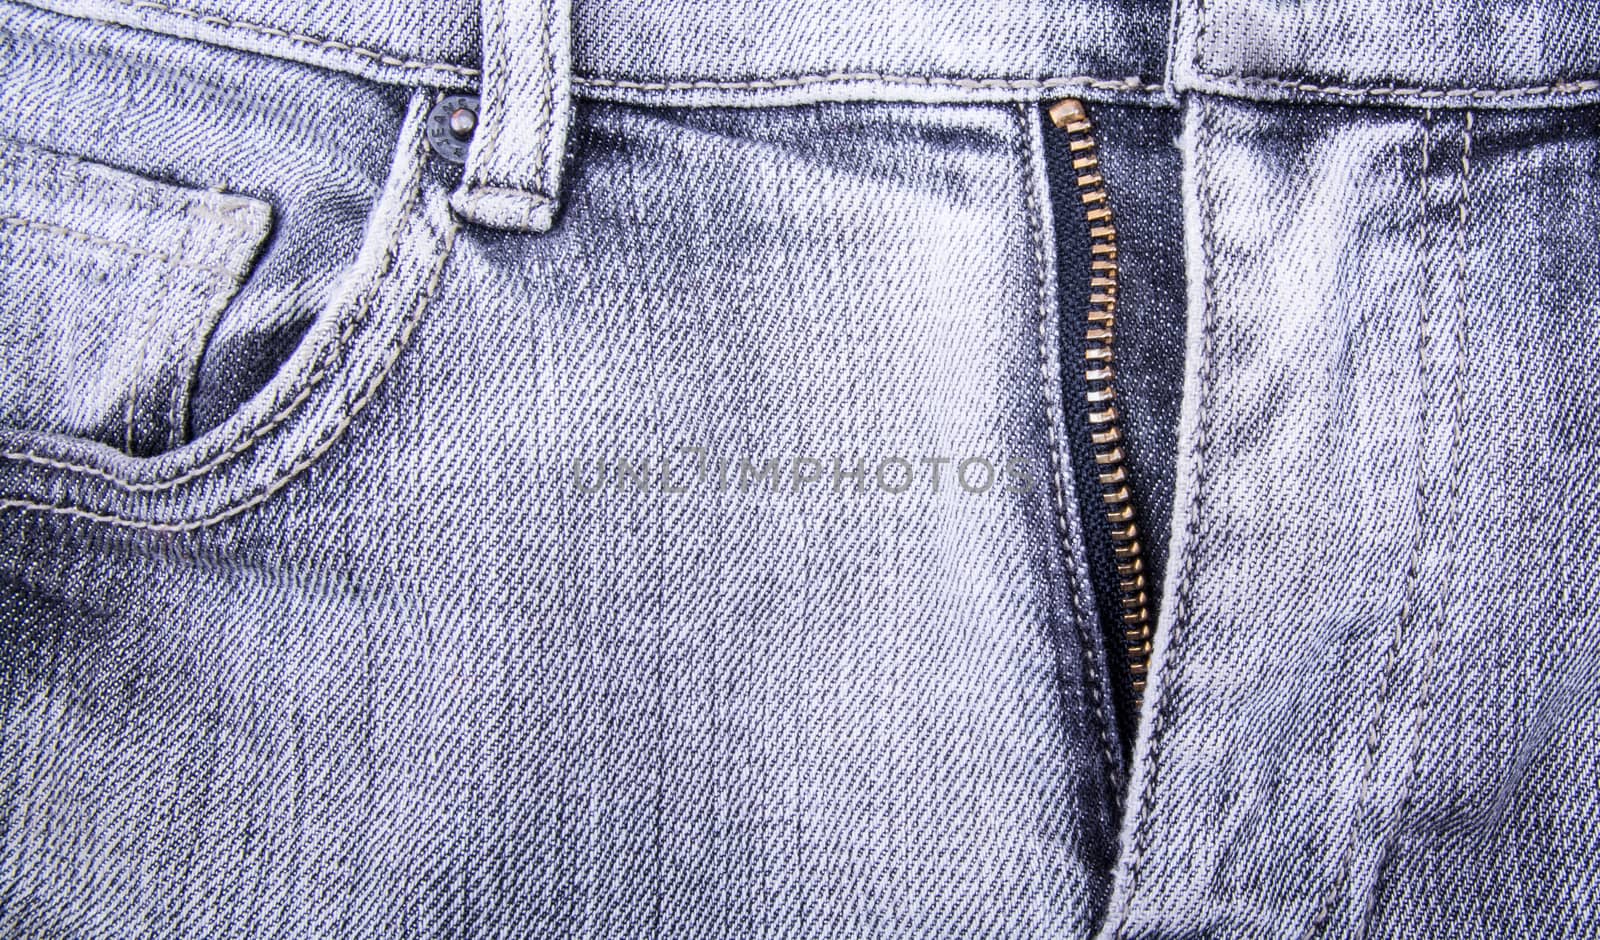 jeans textile by faa069913827